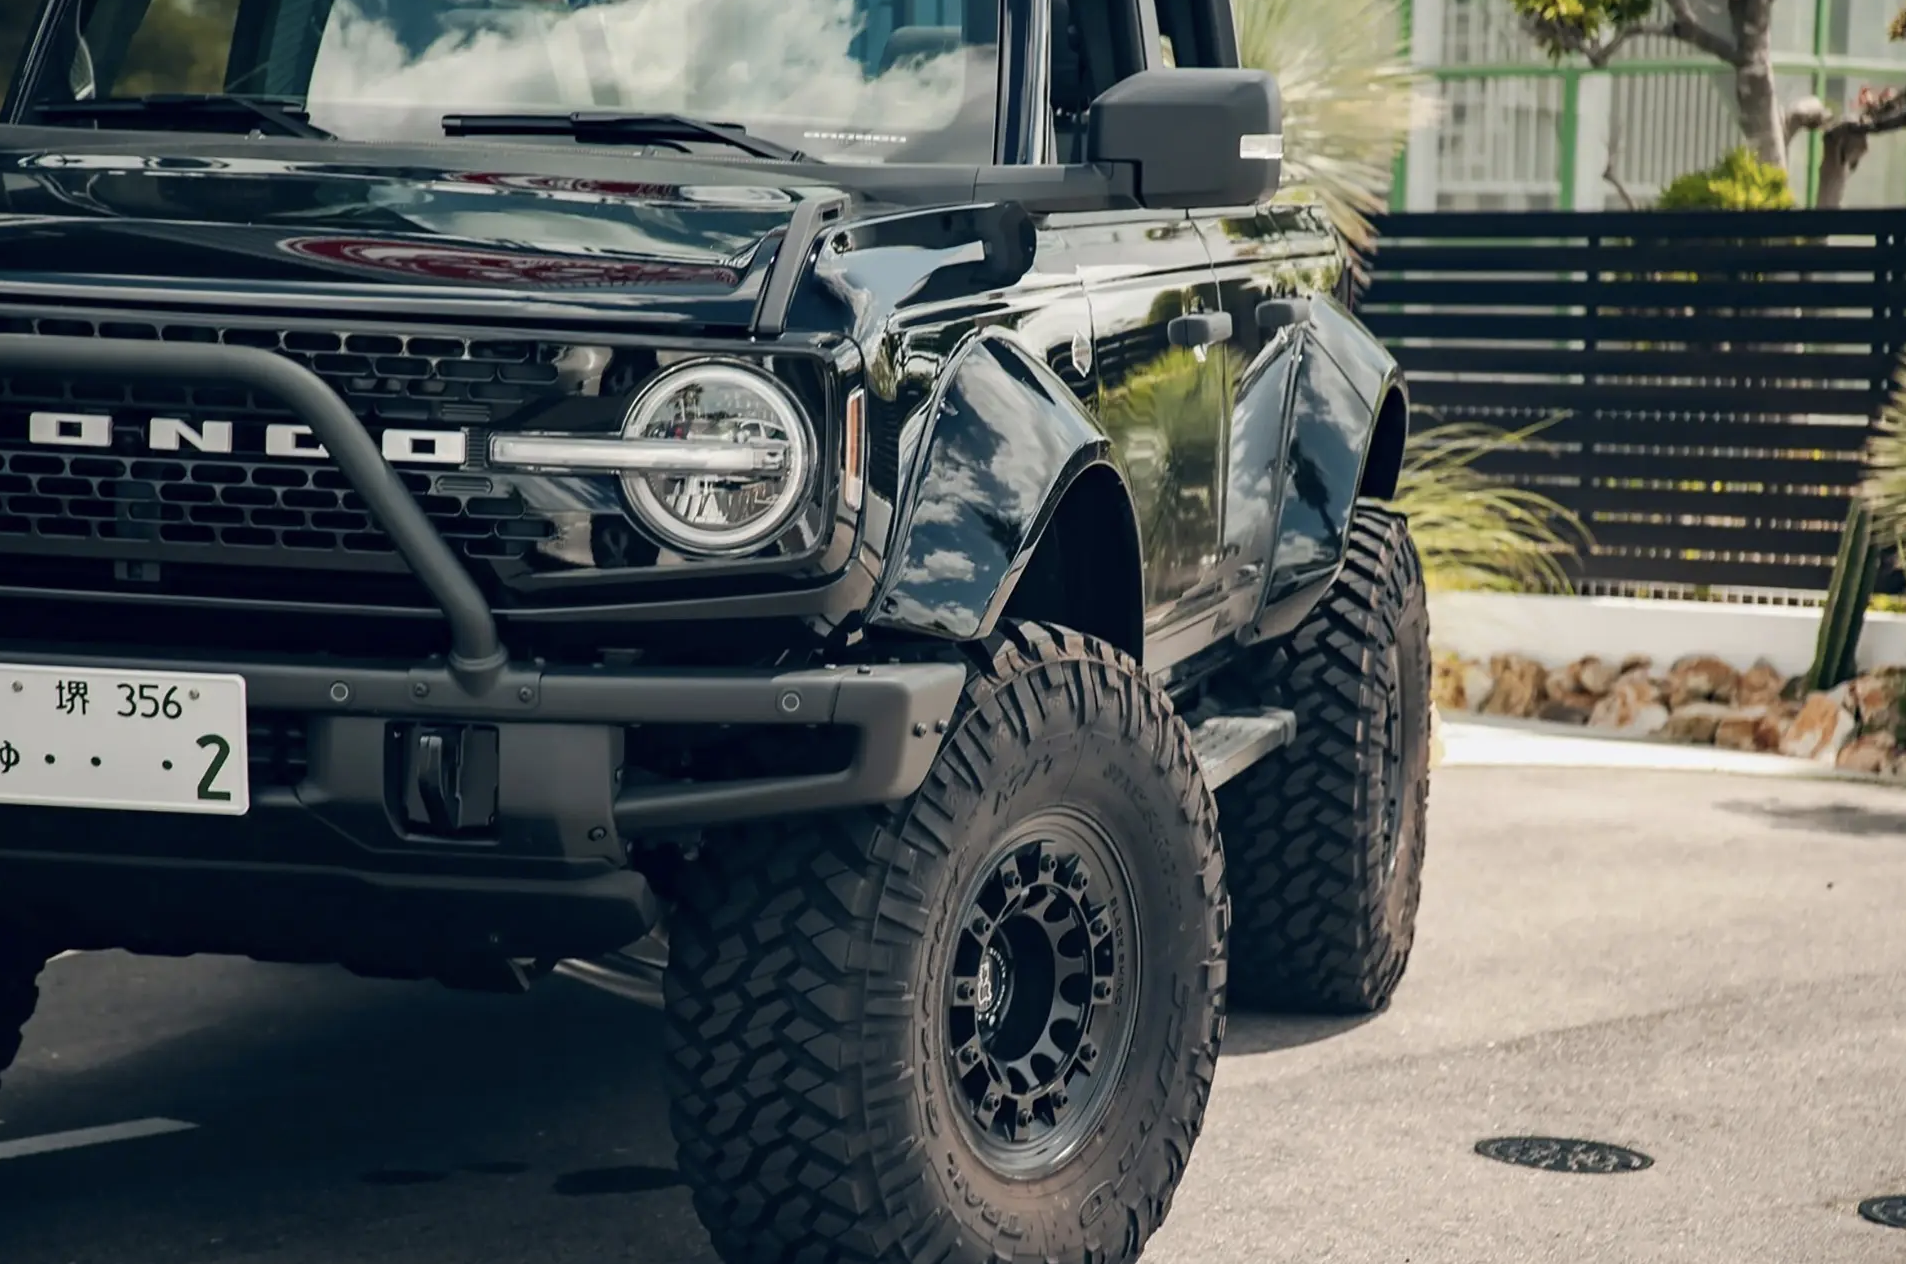 Ford Bronco Liberty Walk Sells a Ford Bronco Widebody Kit 2